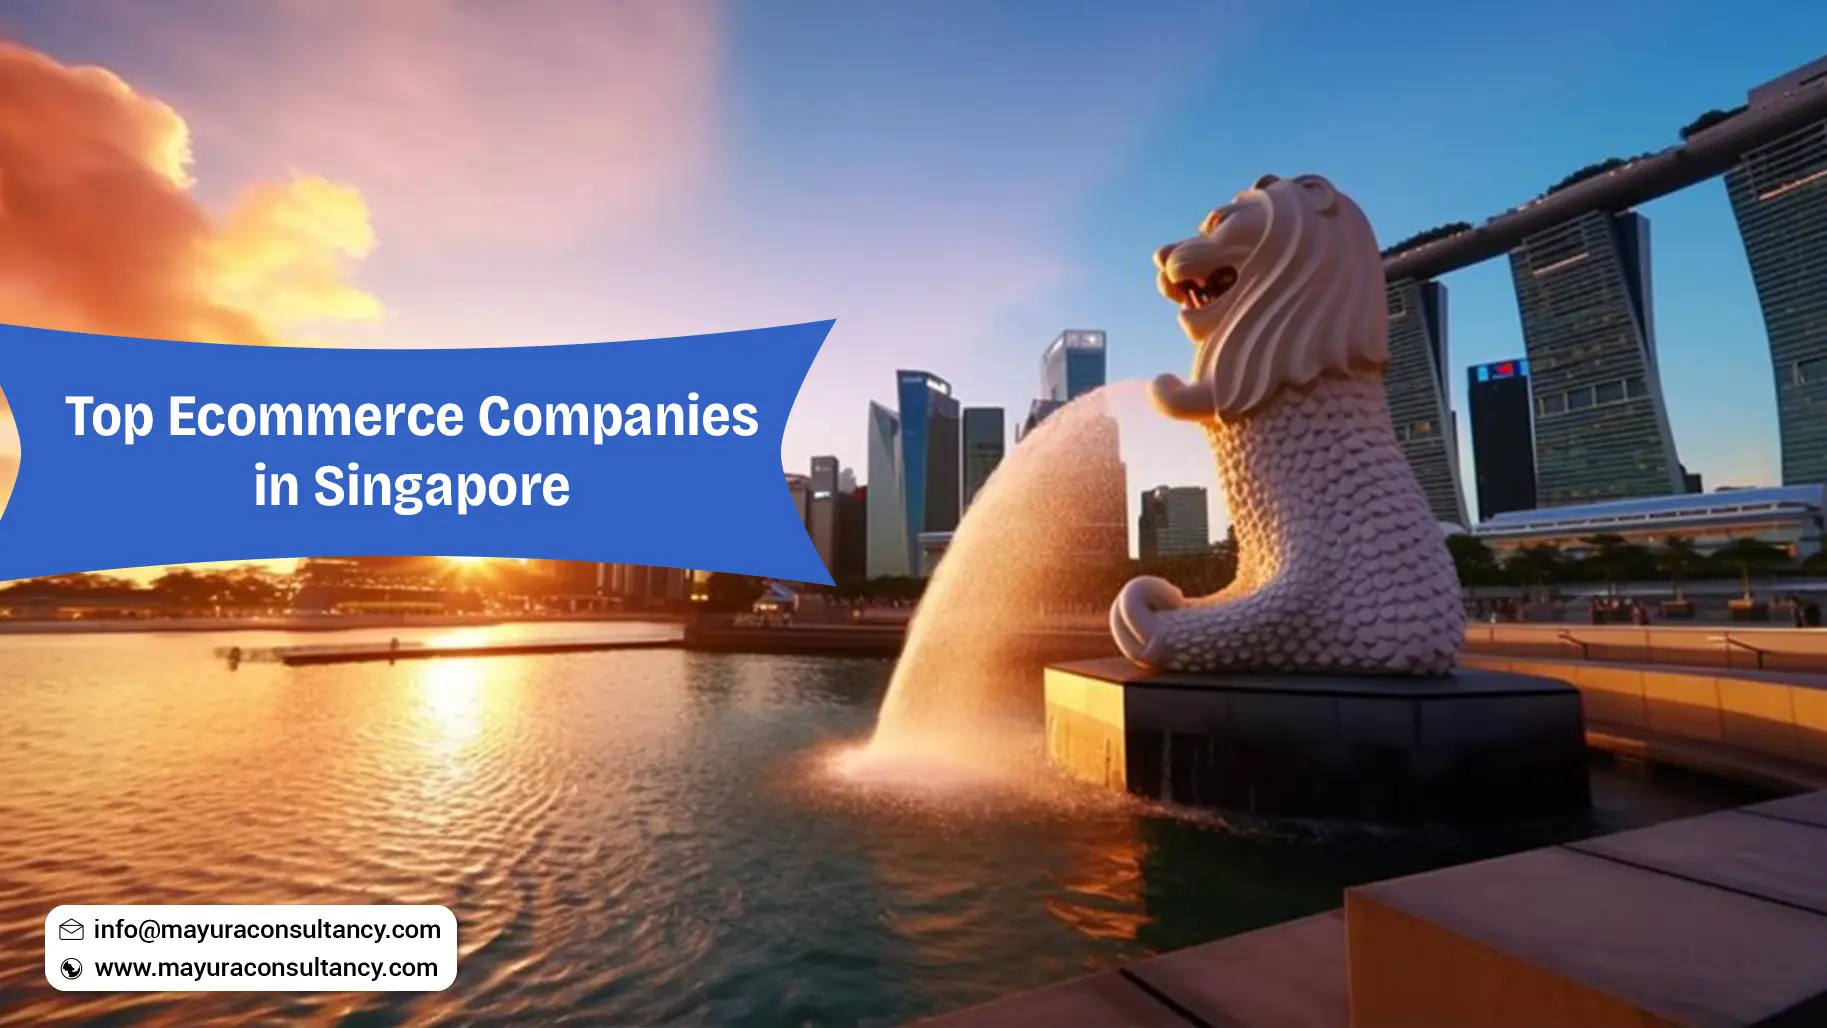 Top Ecommerce Companies in Singapore